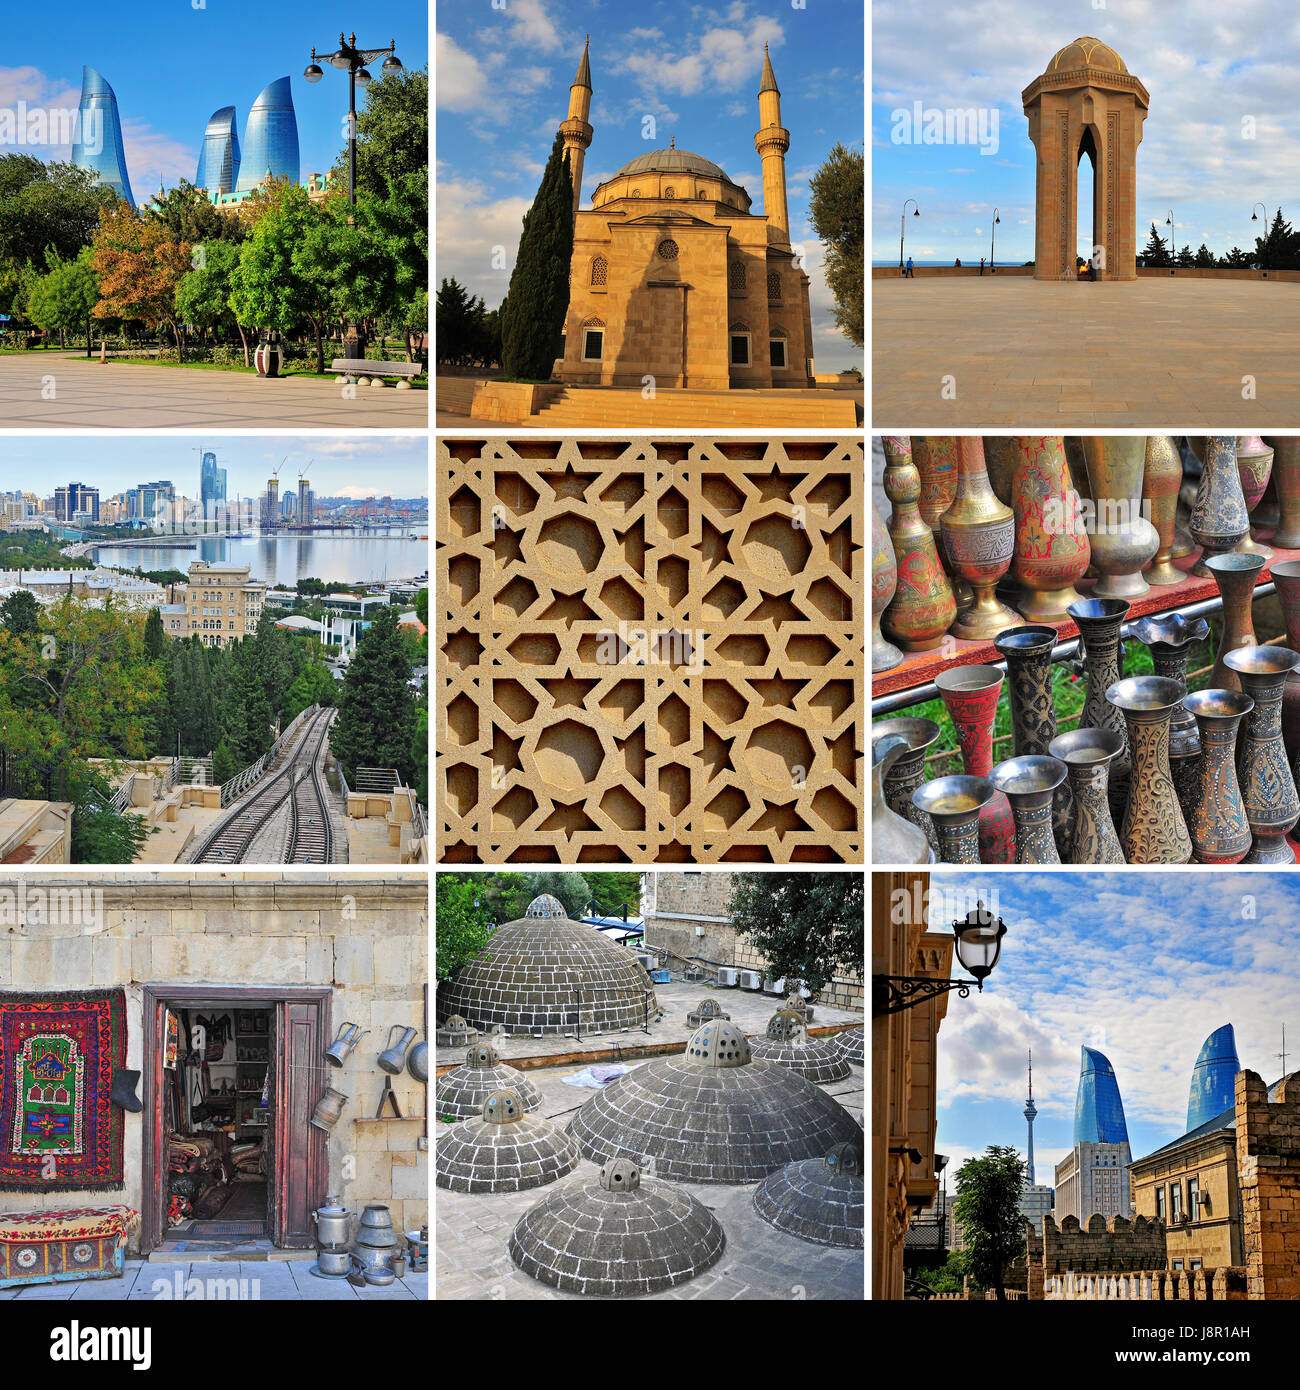 Baku city travel collage. Selection of cultural landmarks and sights of the capital of Azerbaijan Stock Photo